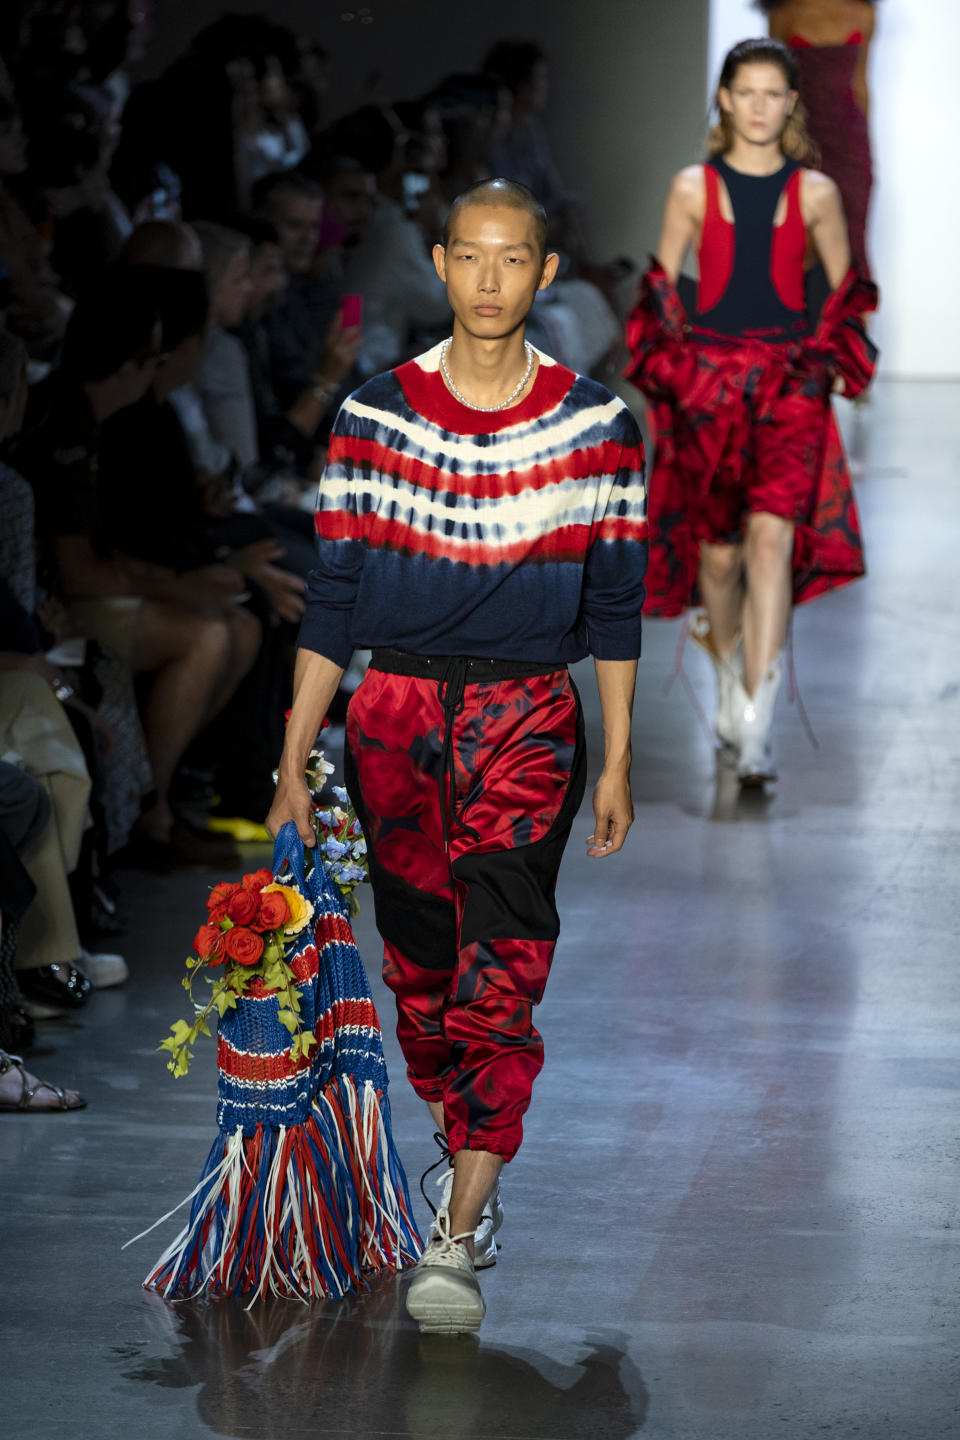 The Prabal Gurung collection is modeled during Fashion Week, Sunday, Sept. 8, 2019 in New York. (AP Photo/Craig Ruttle)